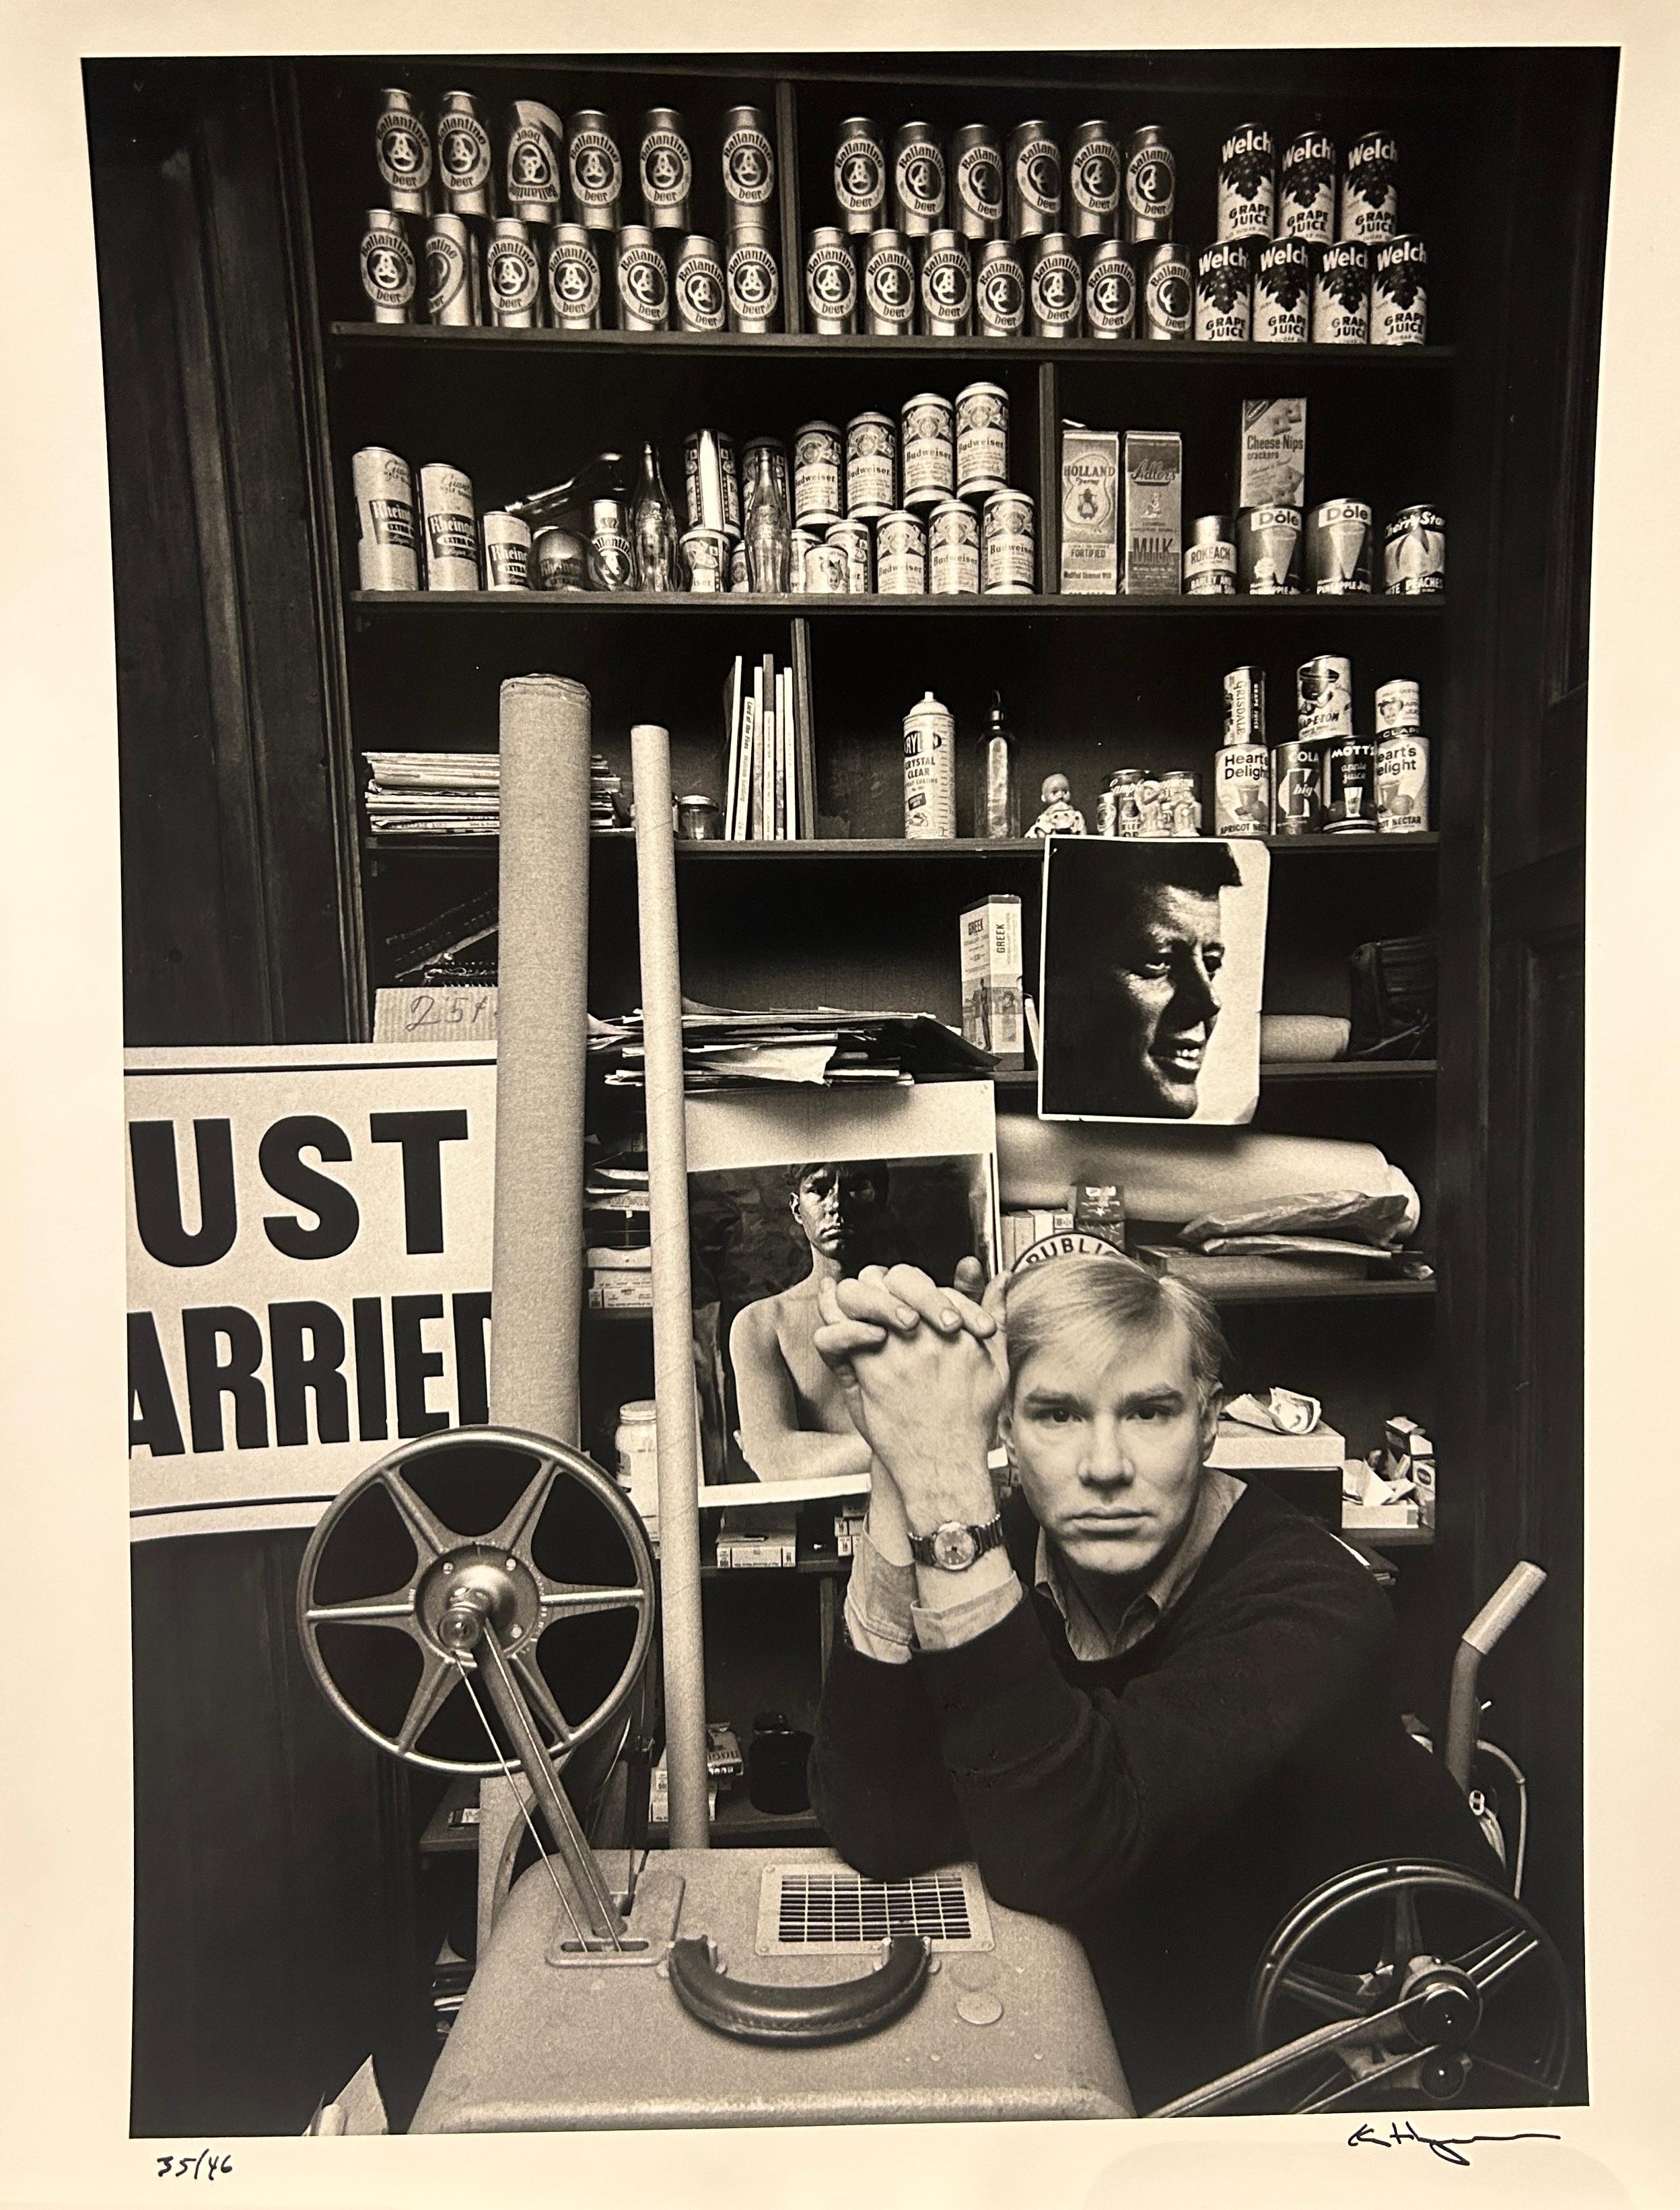 Ken Heyman Black and White Photograph - The Pop Artists: Andy Warhol with 16mm Film Projector, 1964